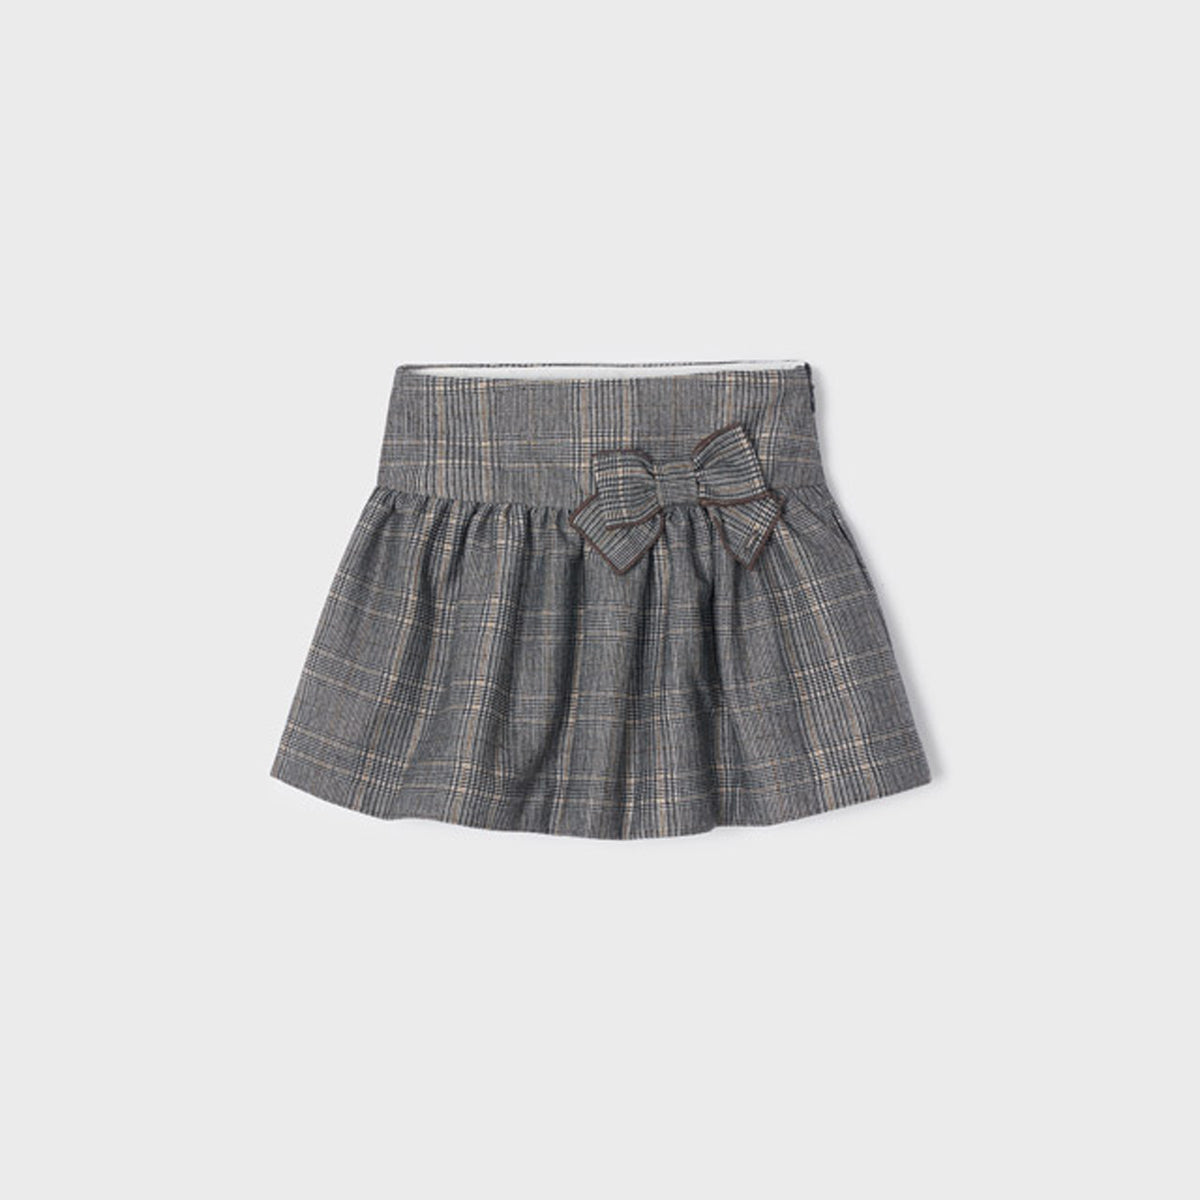 Grey Plaid Skirt With Bow